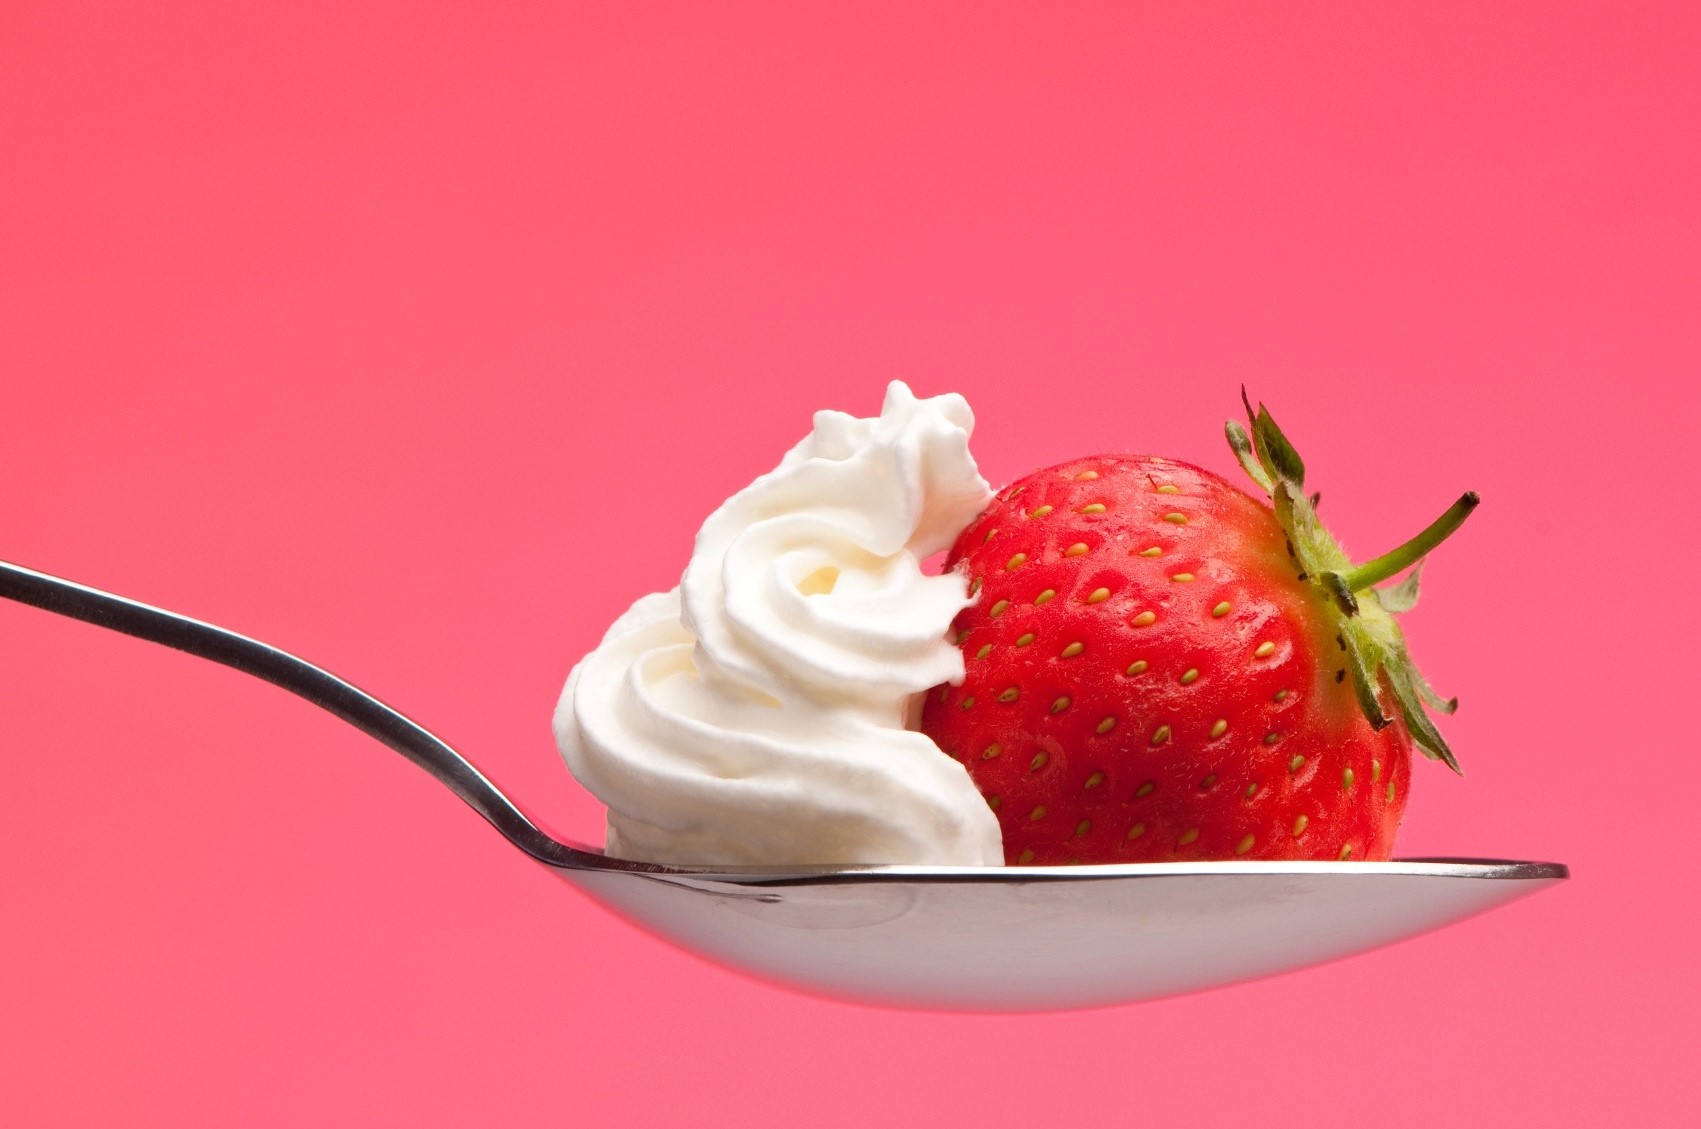 14-facts-about-national-strawberries-and-cream-day-may-21st